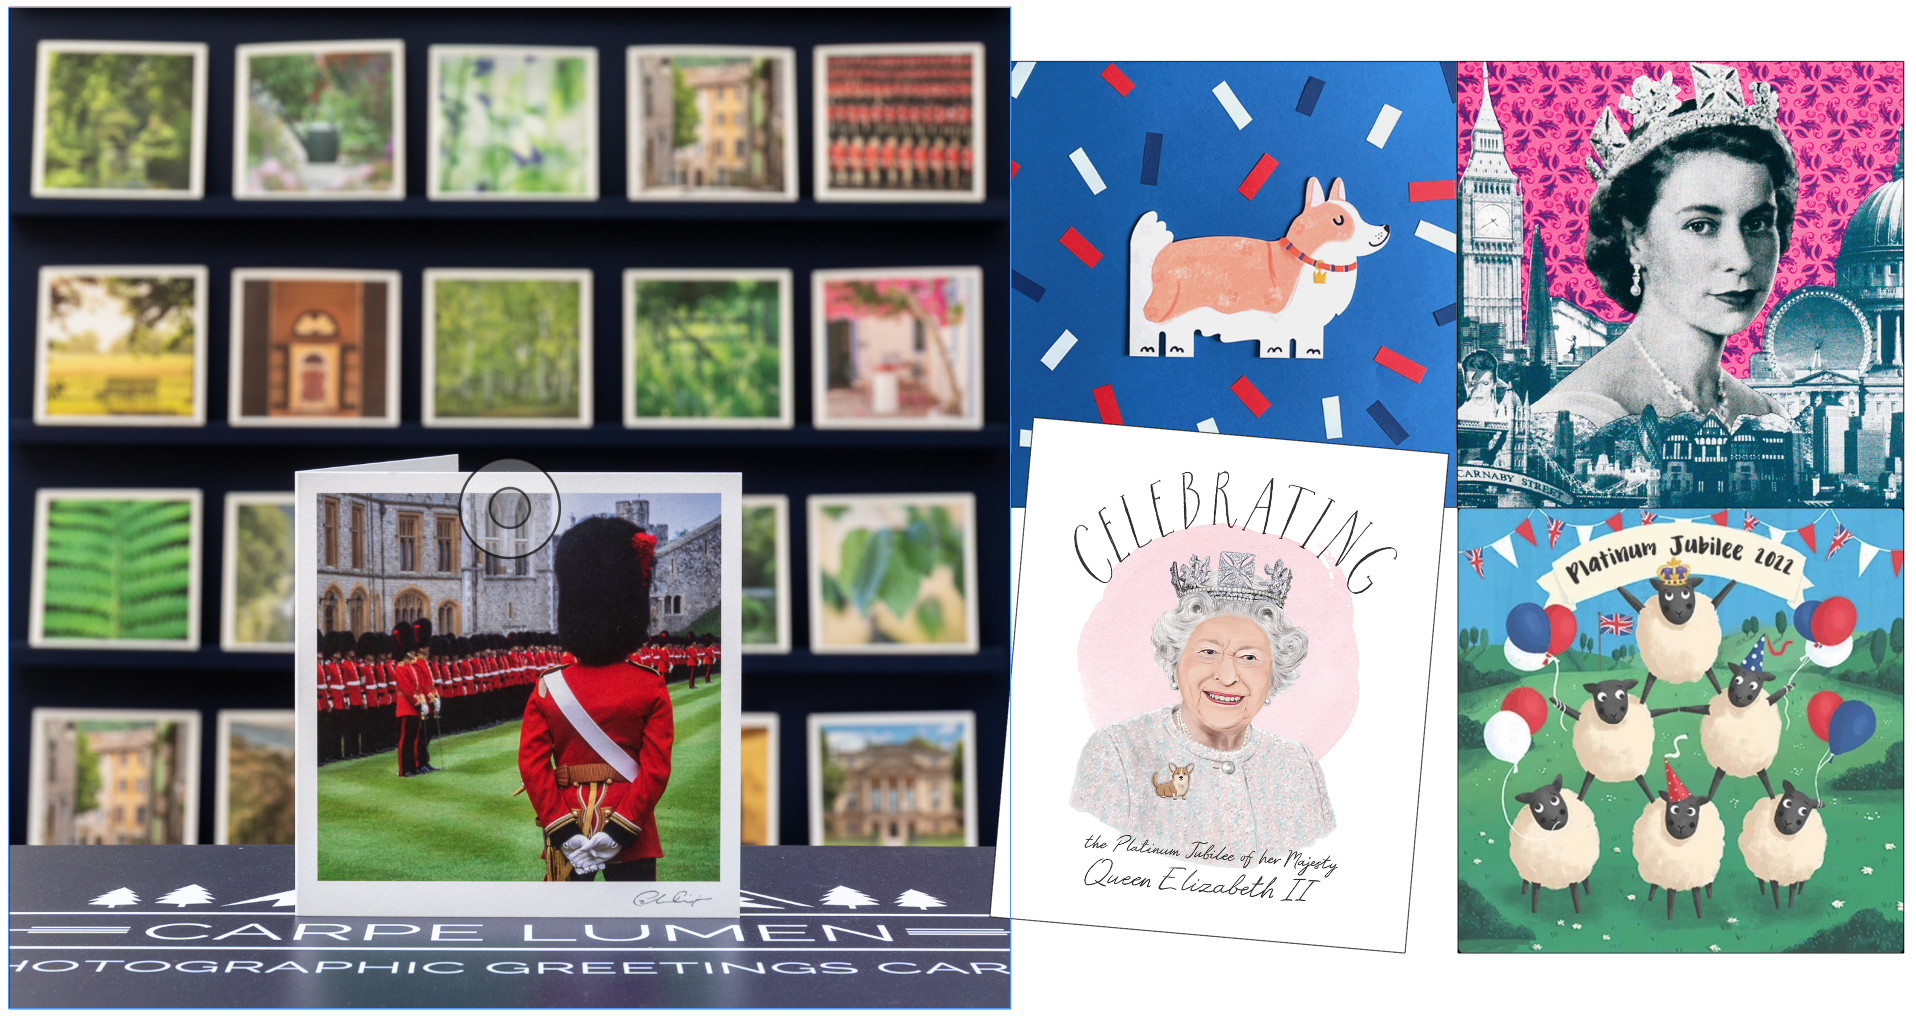 Above: Cards galore – (clockwise from left) Carpe Lumen, Raspberry Blossom, UK Greetings, Paintbox, and Woodmansterne Jubilee designs